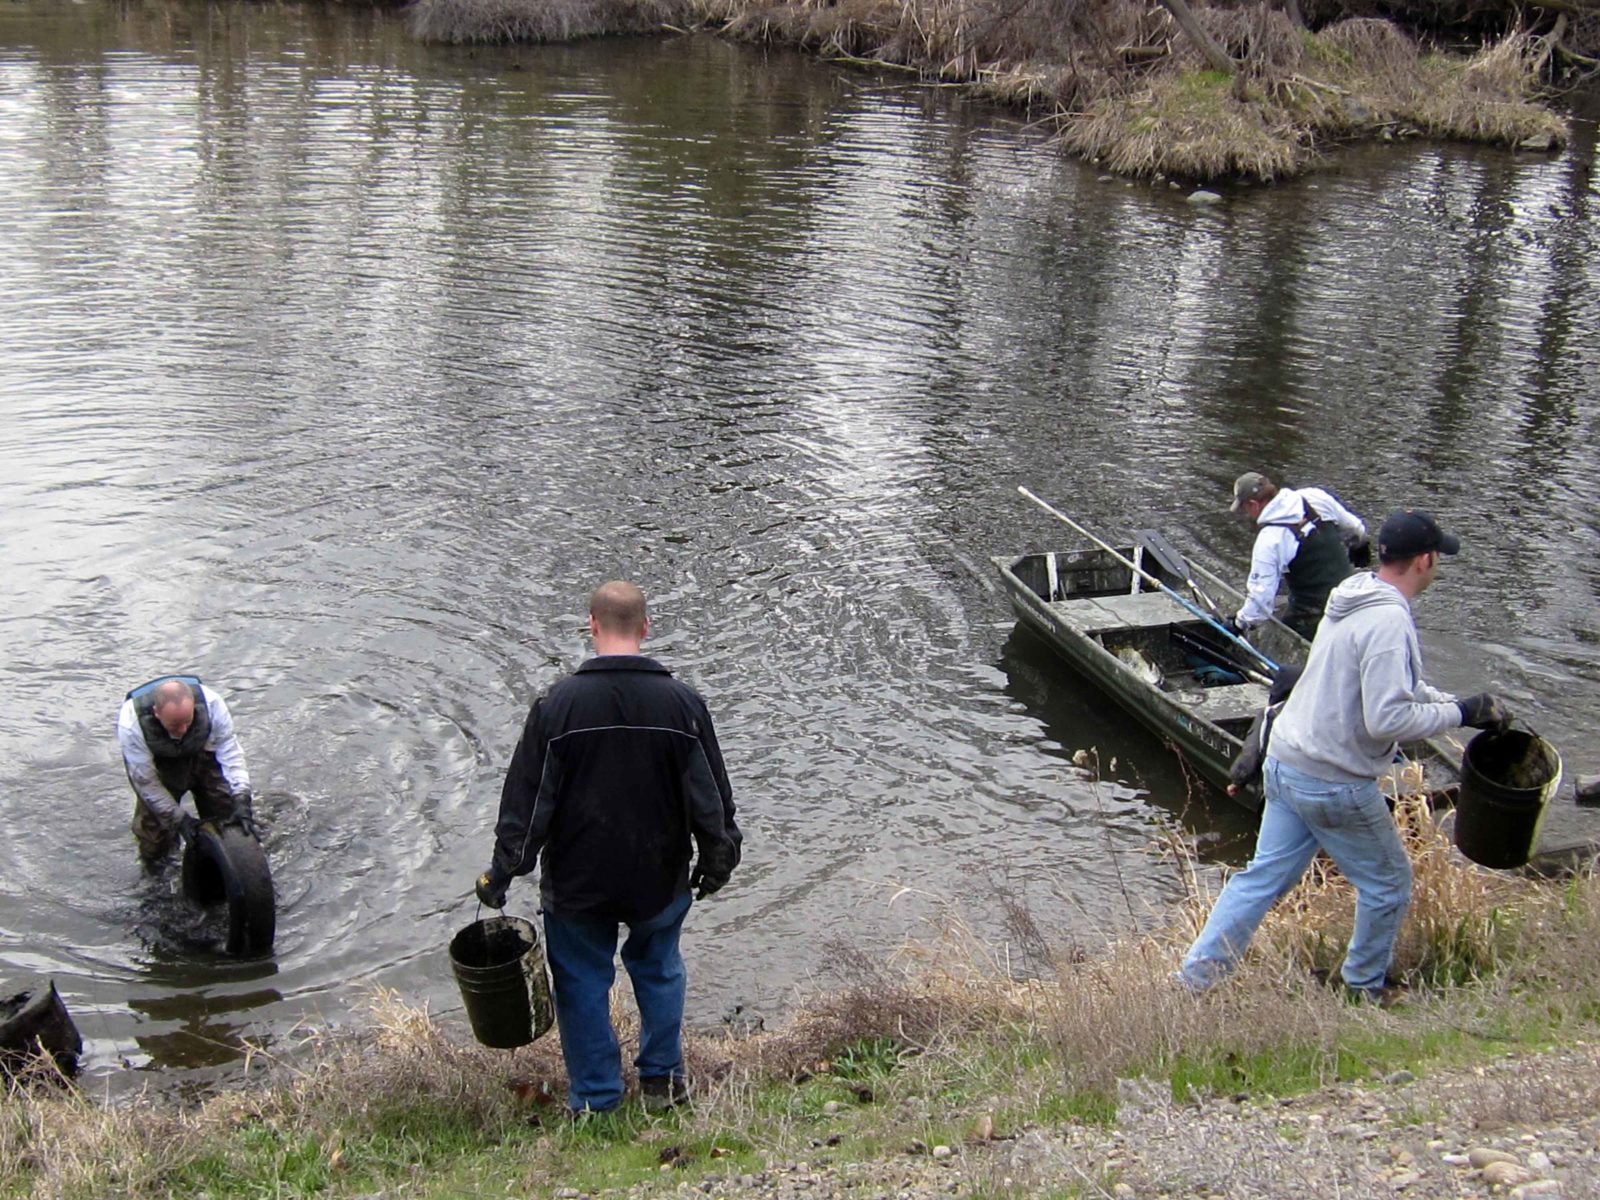 Community members hauling debris out of the pond at The Willows.